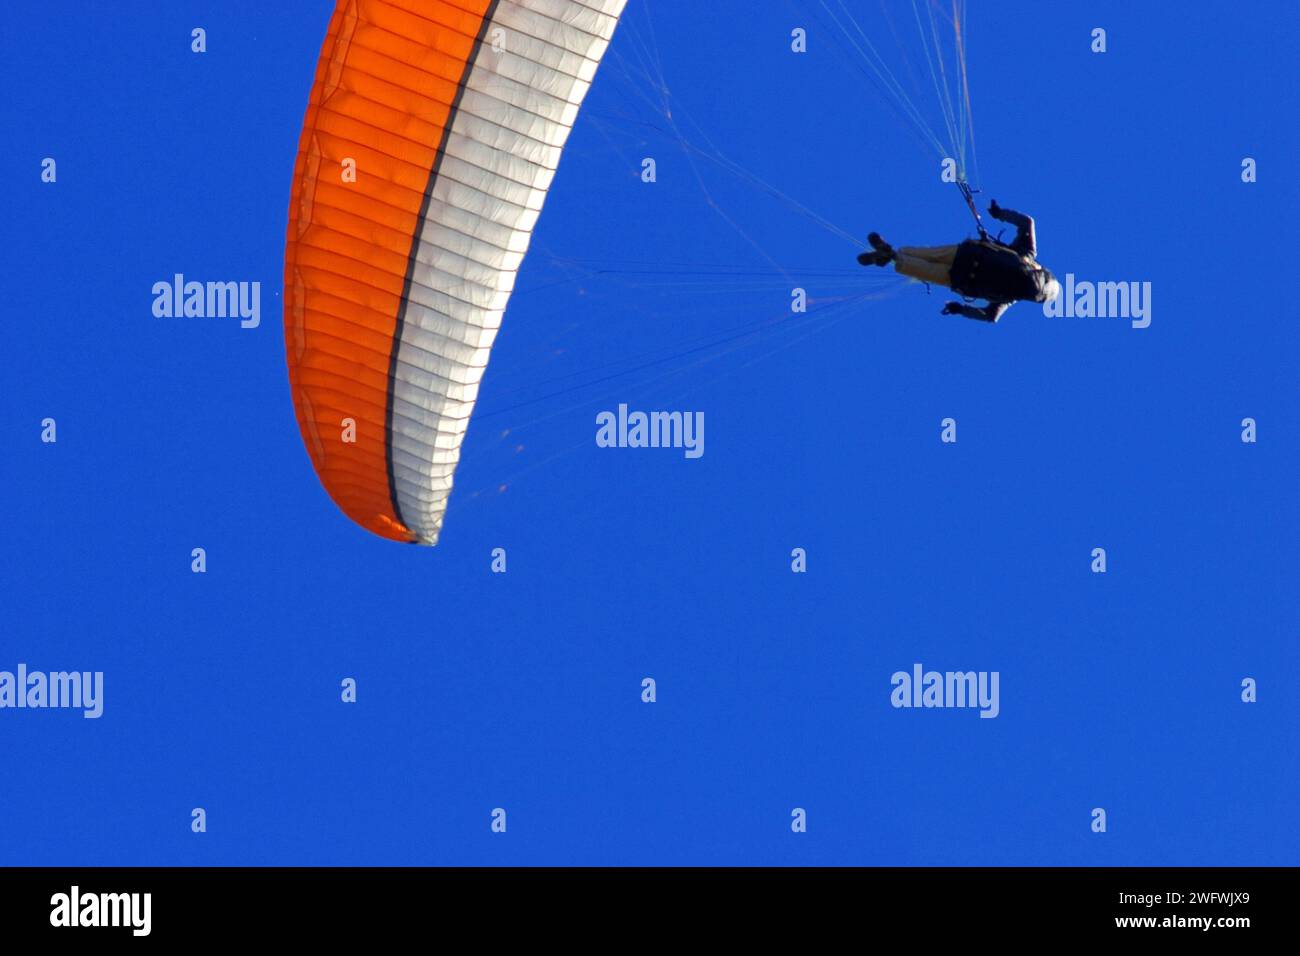 a paraglider with an orange and white canopy in the blue sky Stock Photo